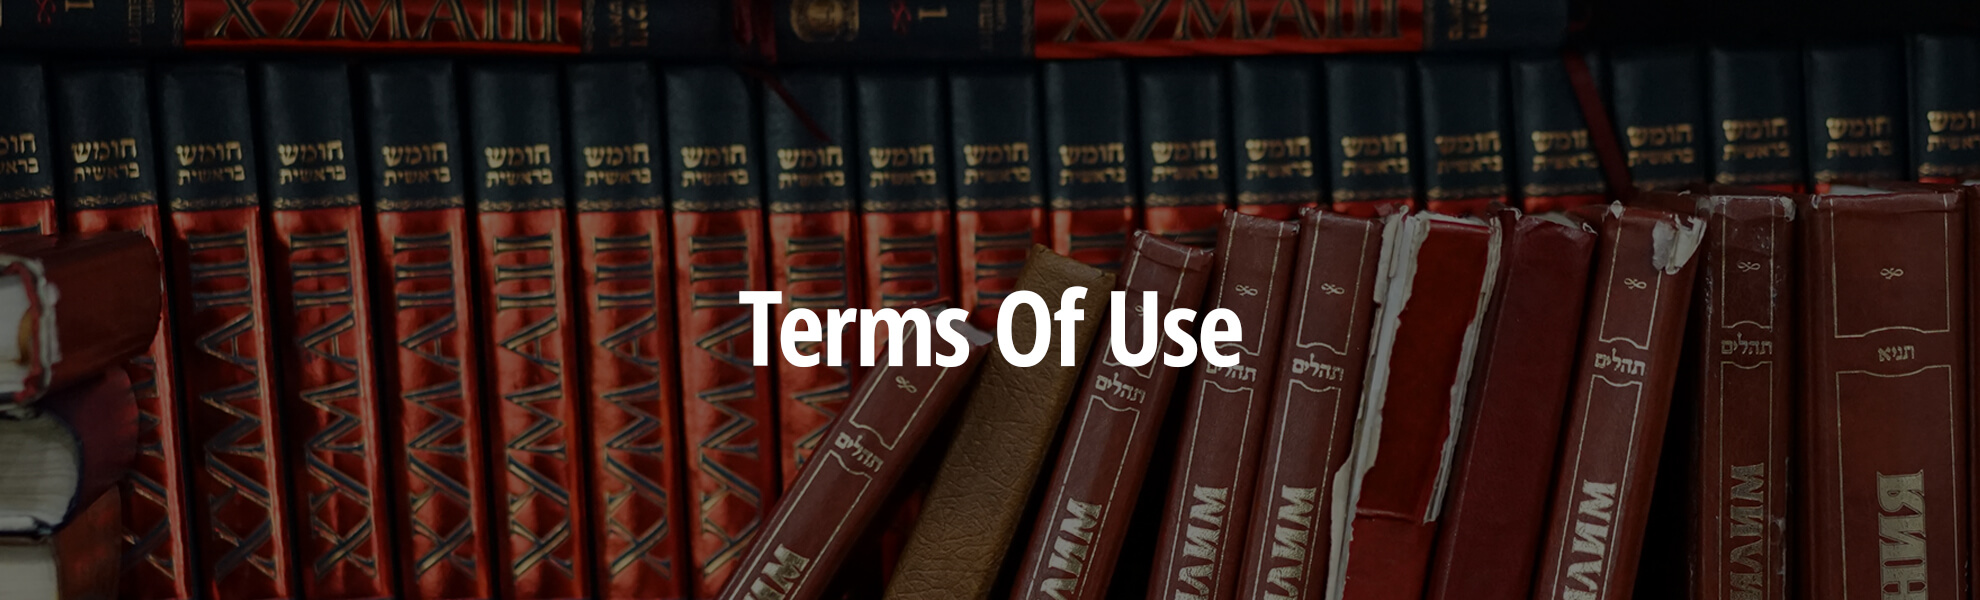 Terms Of Use Banner